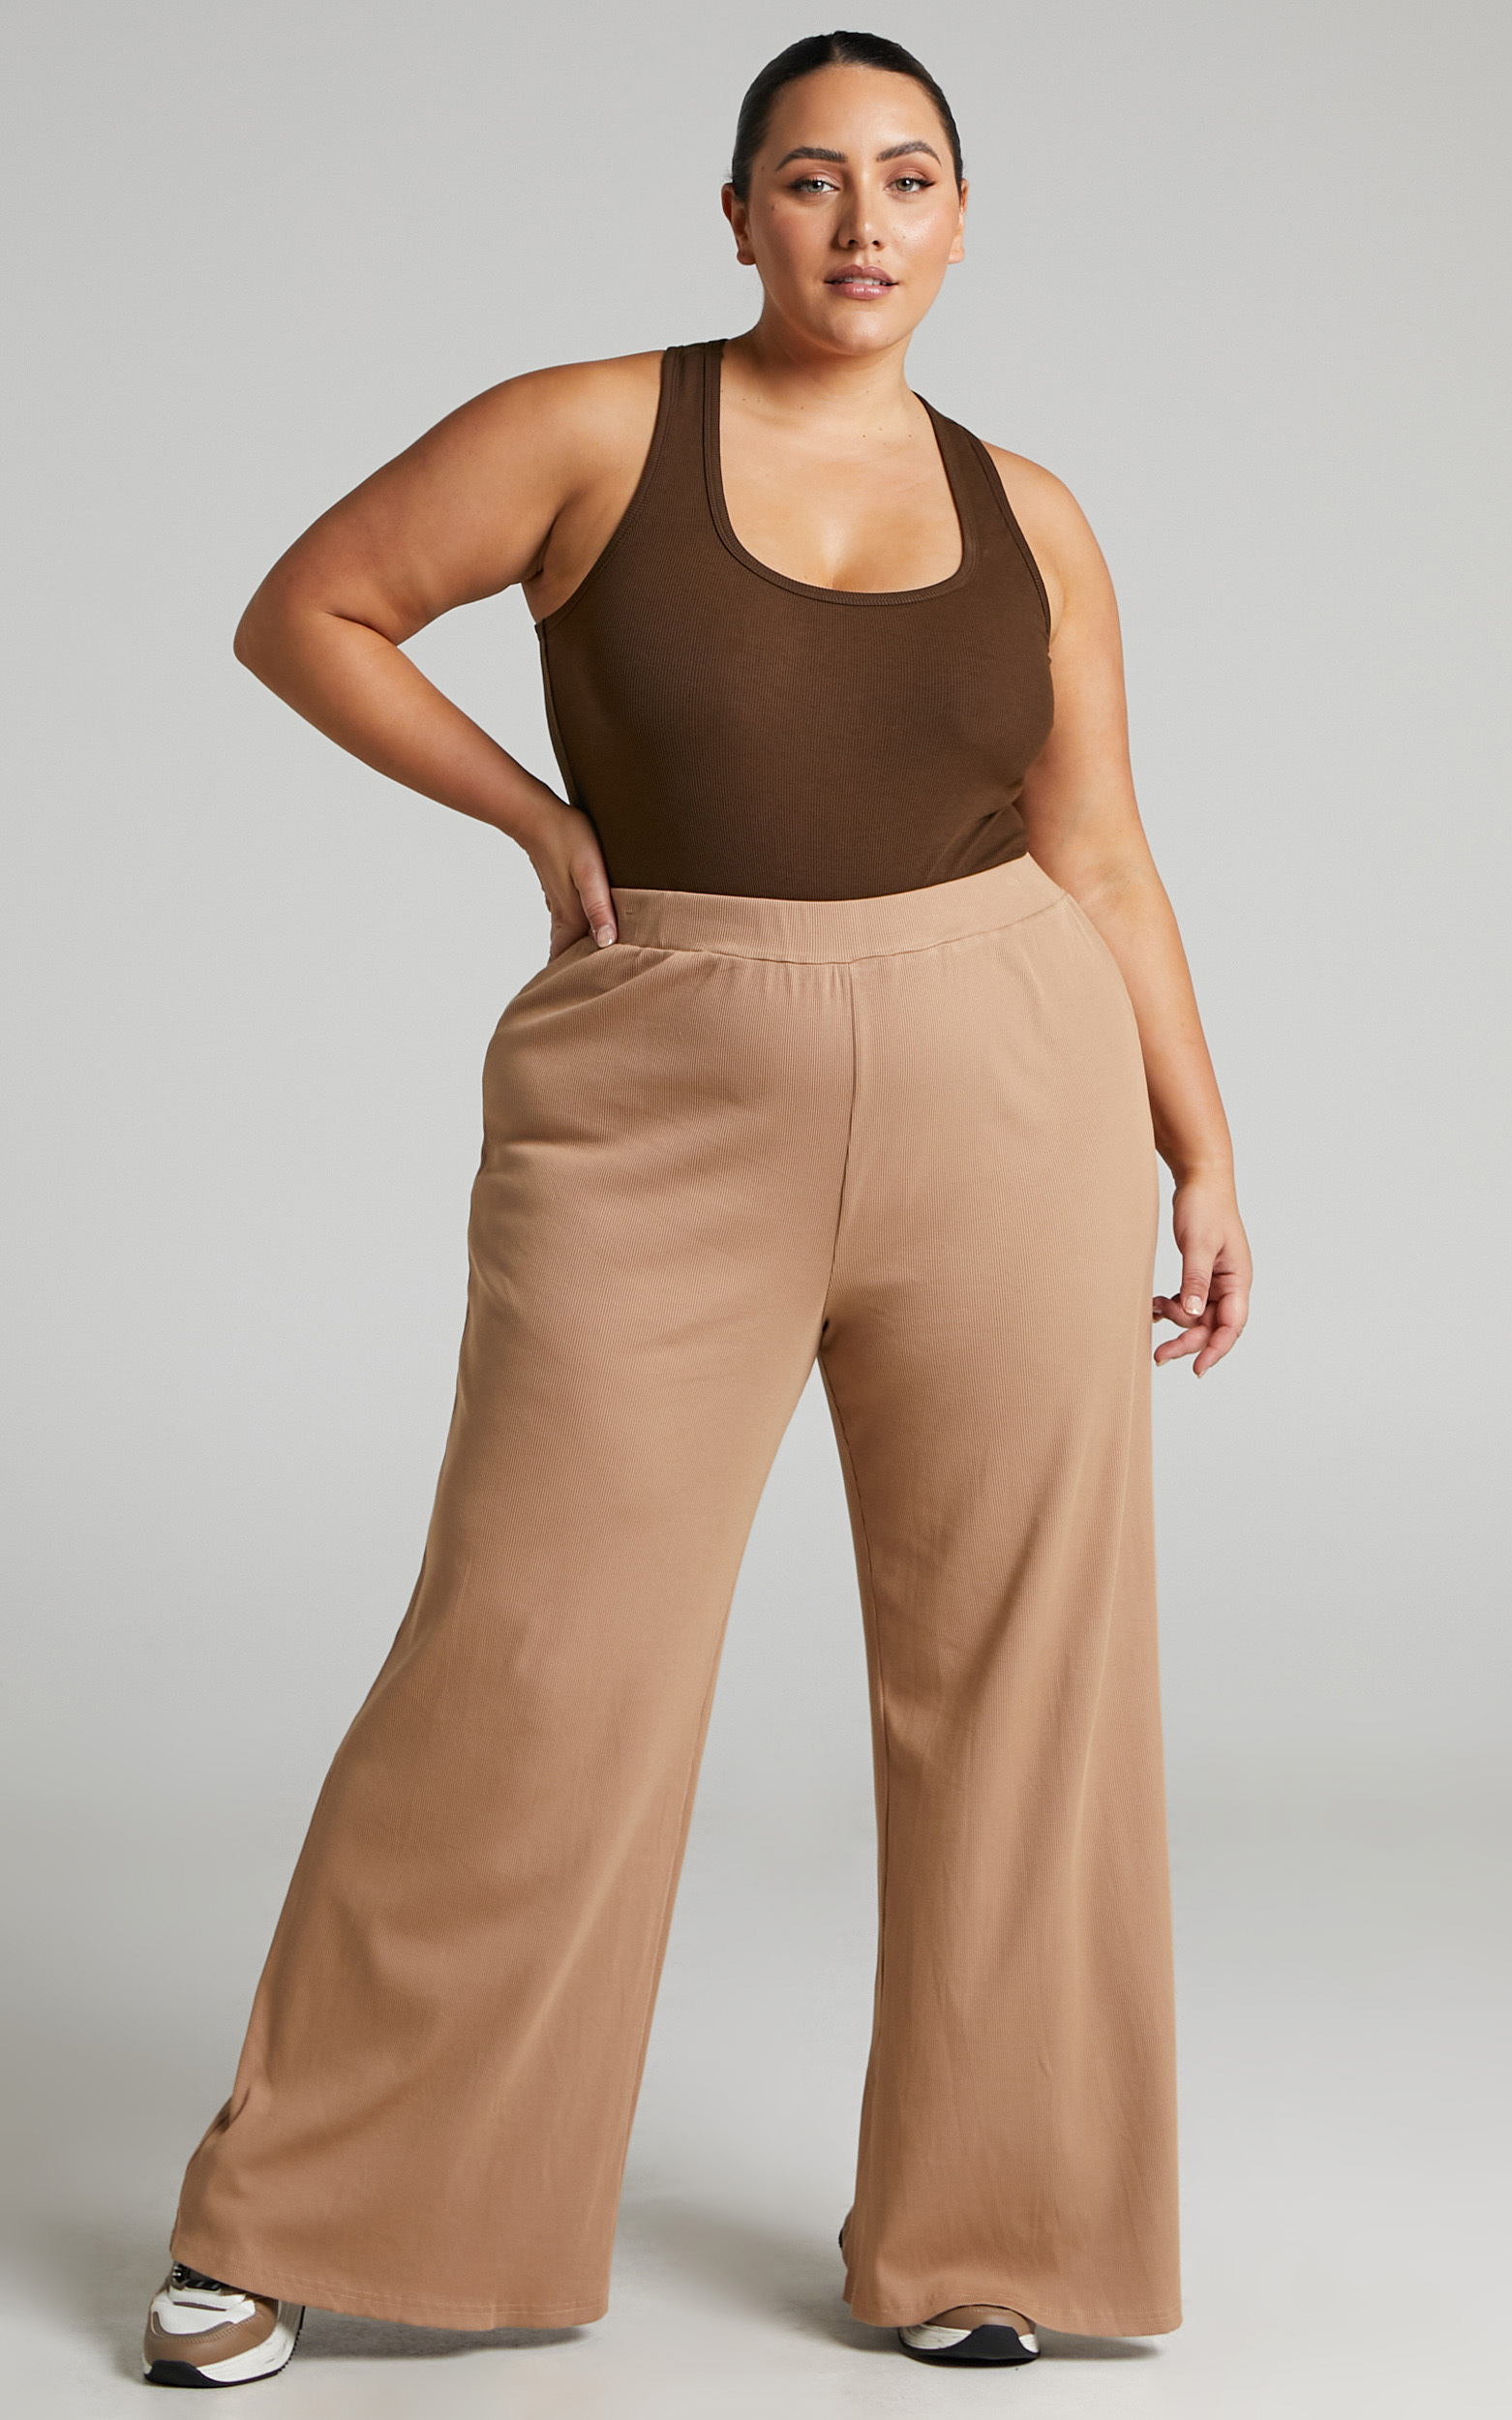 Amalthea Wide Leg Pant in Rib Knit in Camel - 04, BRN2, hi-res image number null